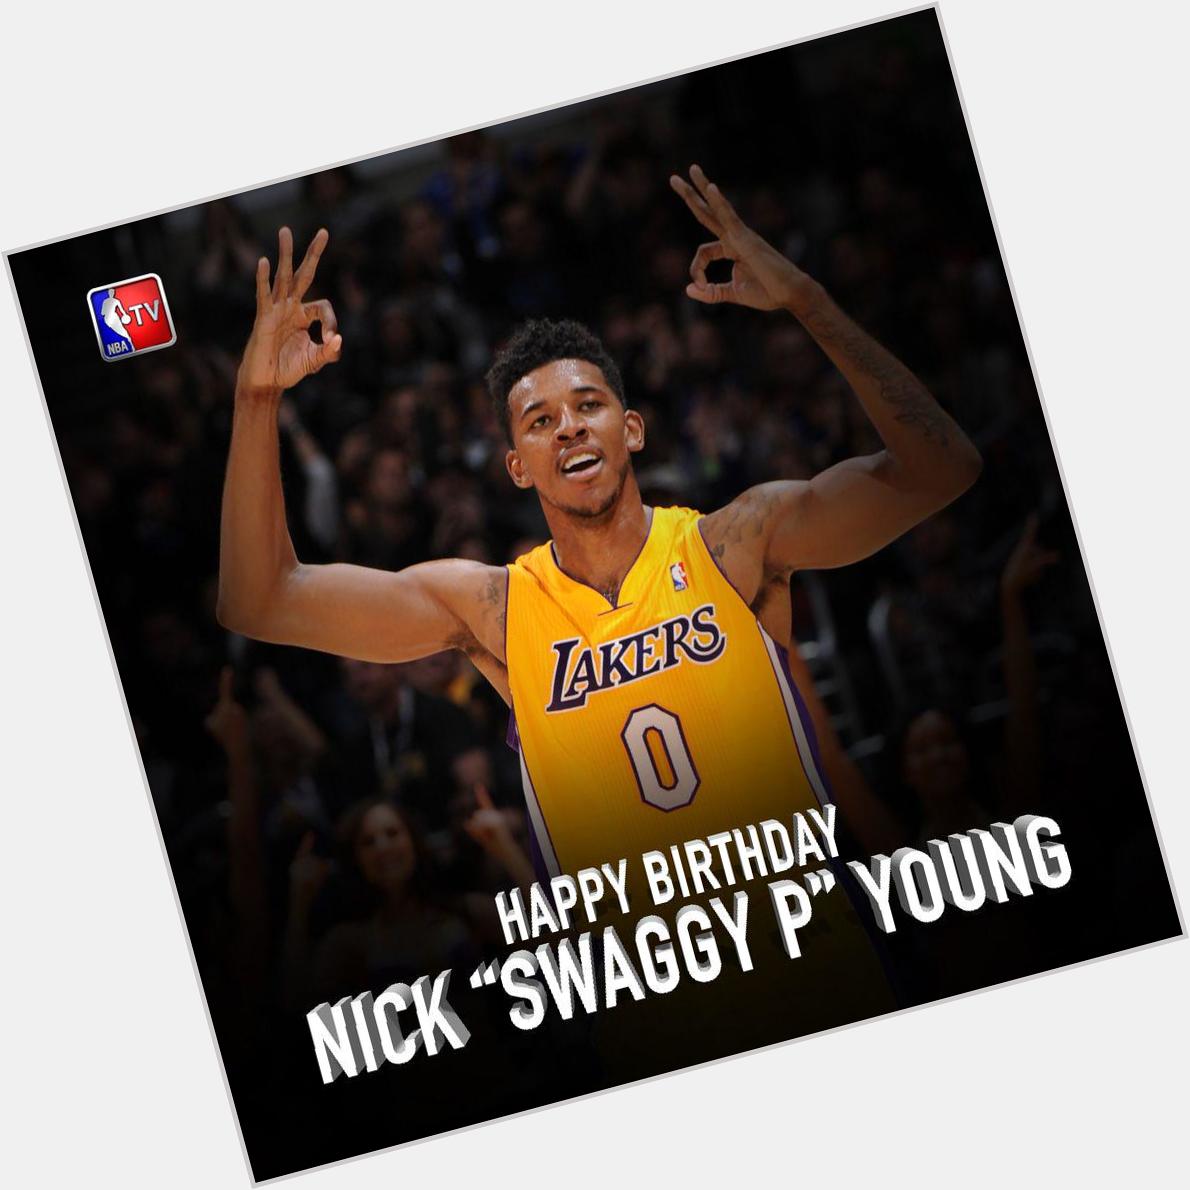 Fuck Nick Young. \" Join us in wishing a Happy Birthday! 